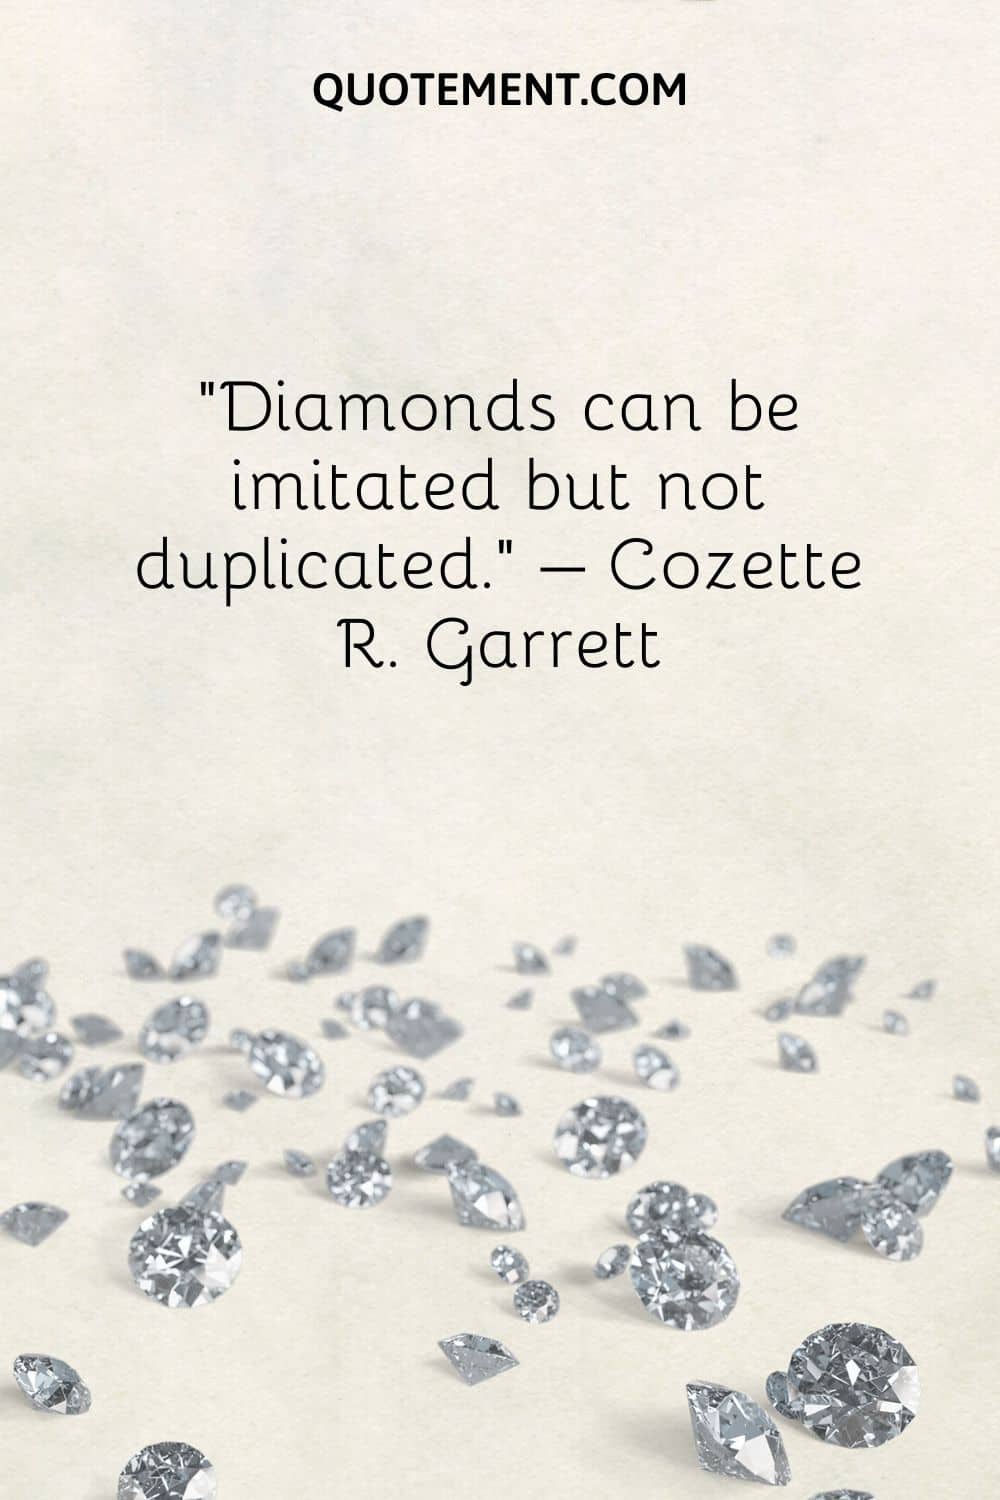 Diamonds can be imitated but not duplicated.